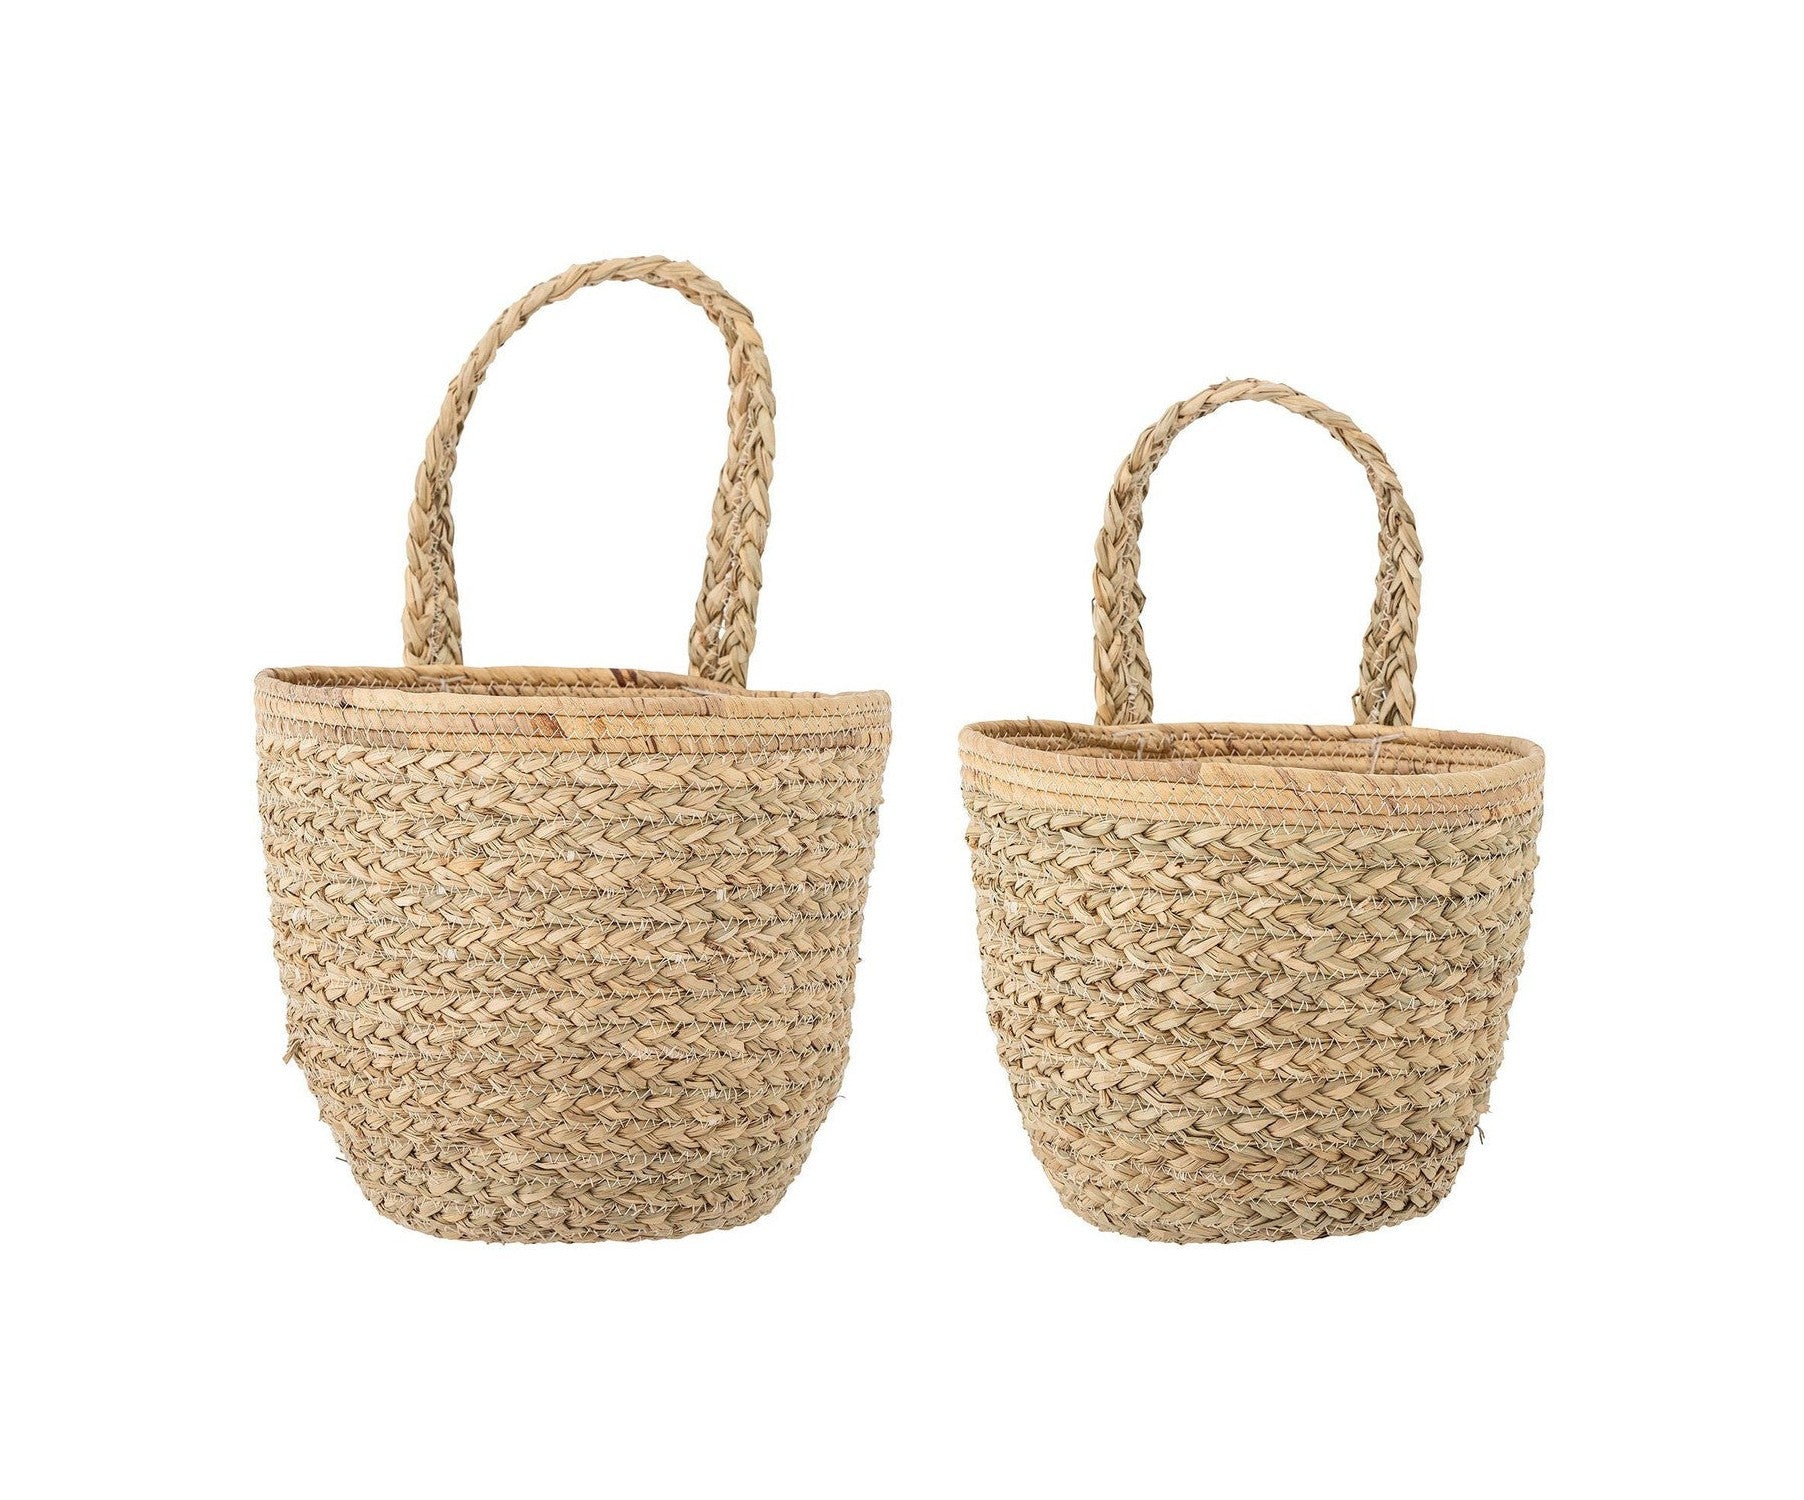 Bloomingville Amia Wall Basket, Nature, Seagrass